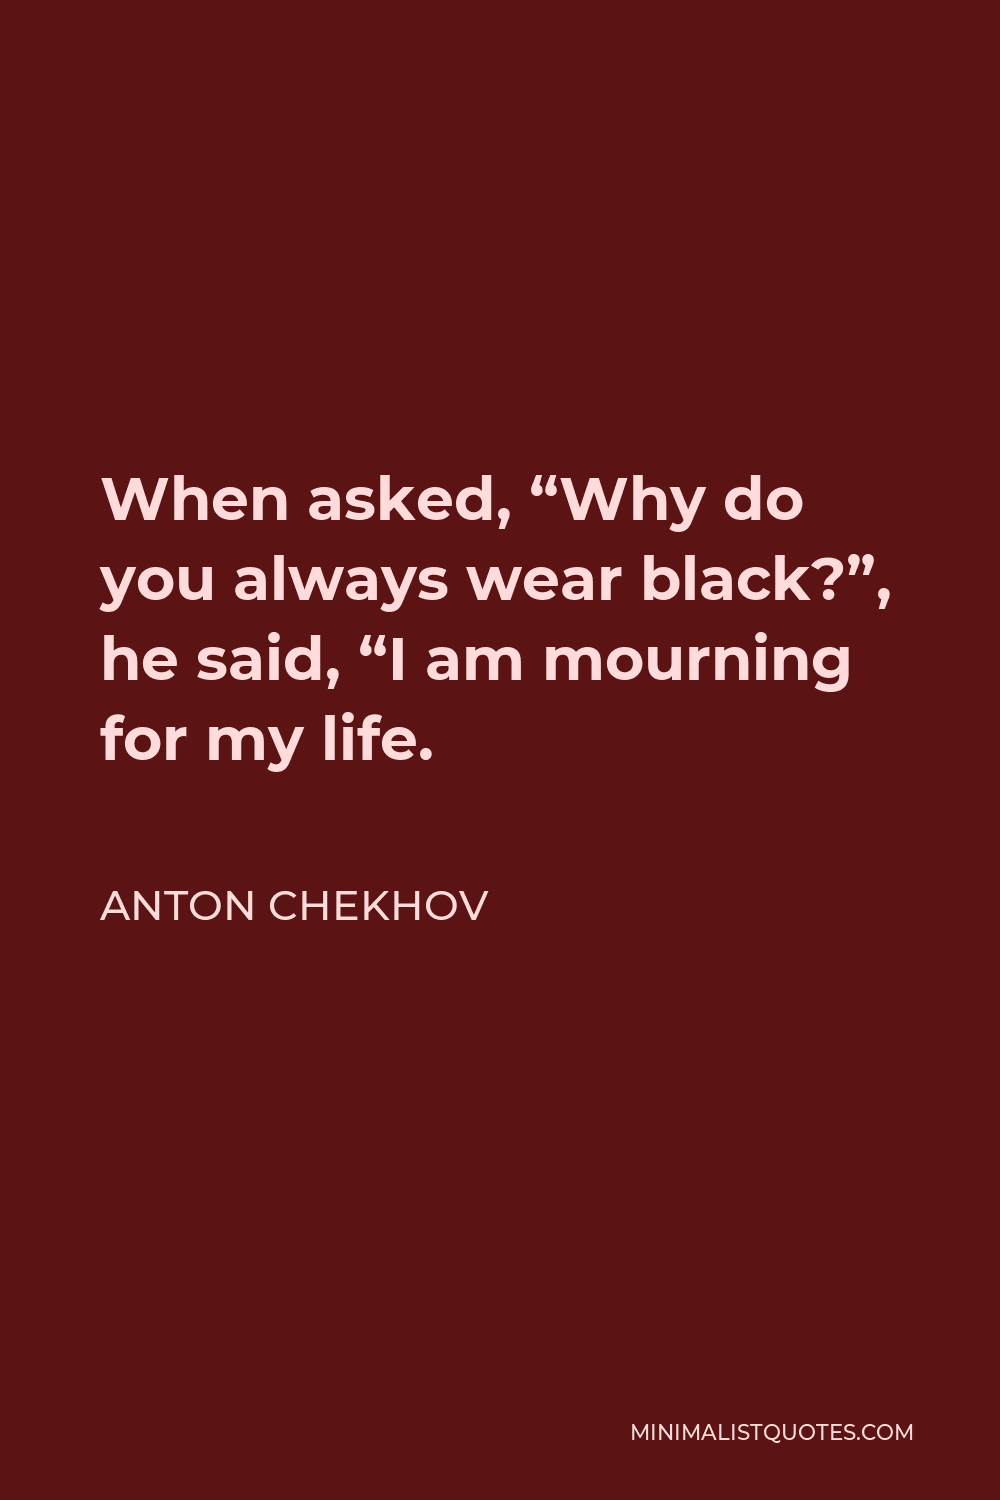 Anton Chekhov Quote - When asked, “Why do you always wear black?”, he said, “I am mourning for my life.